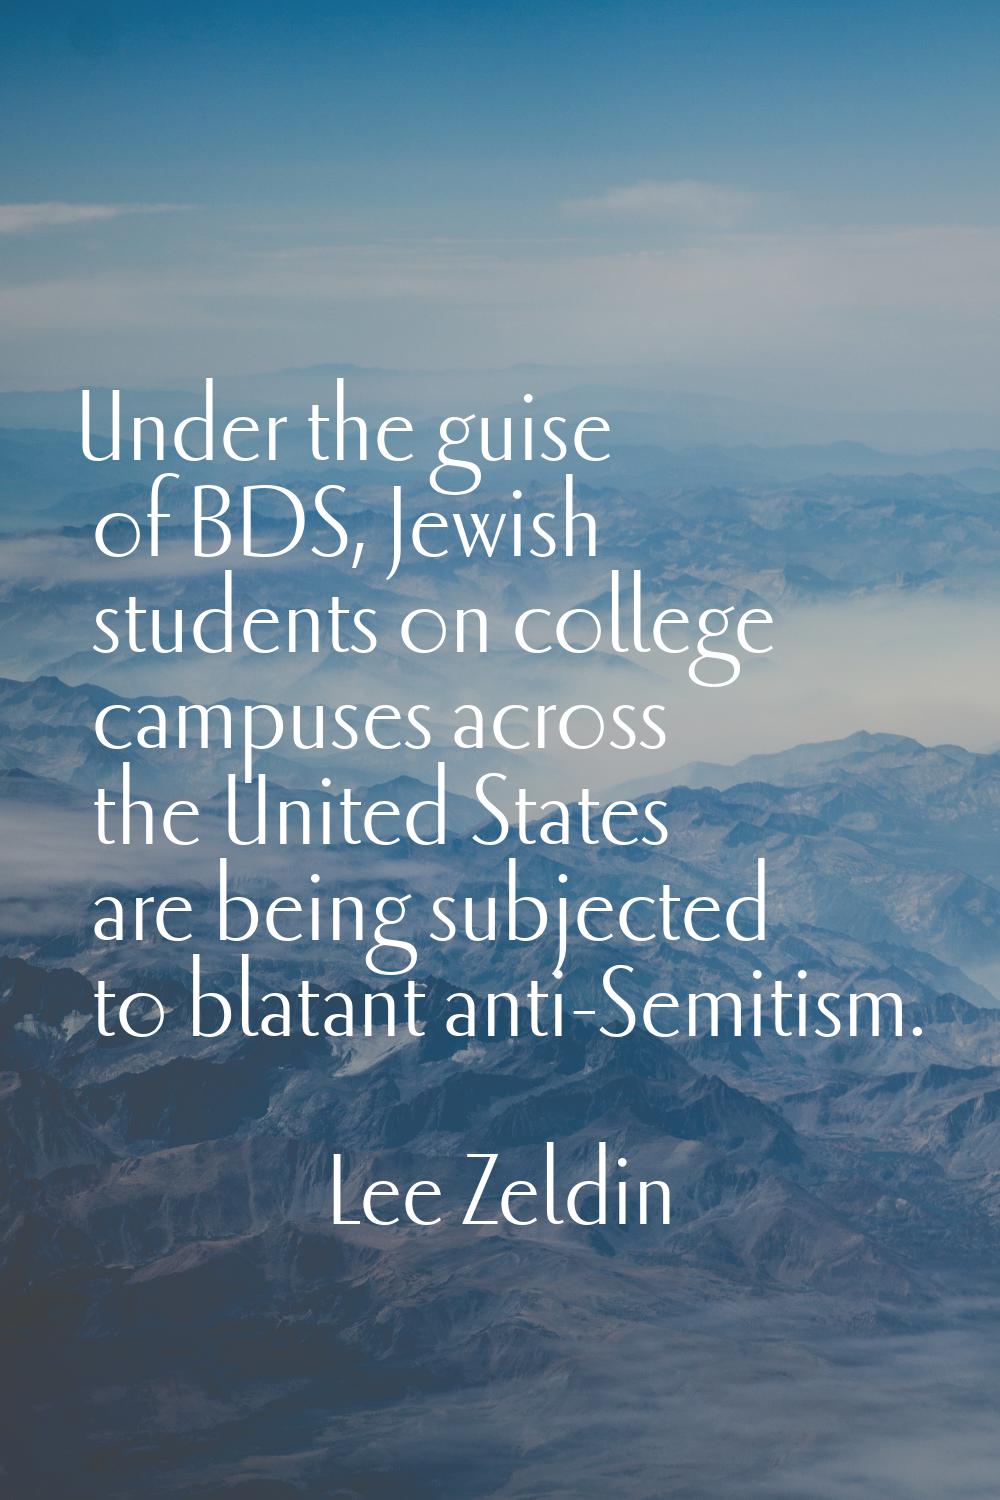 Under the guise of BDS, Jewish students on college campuses across the United States are being subj